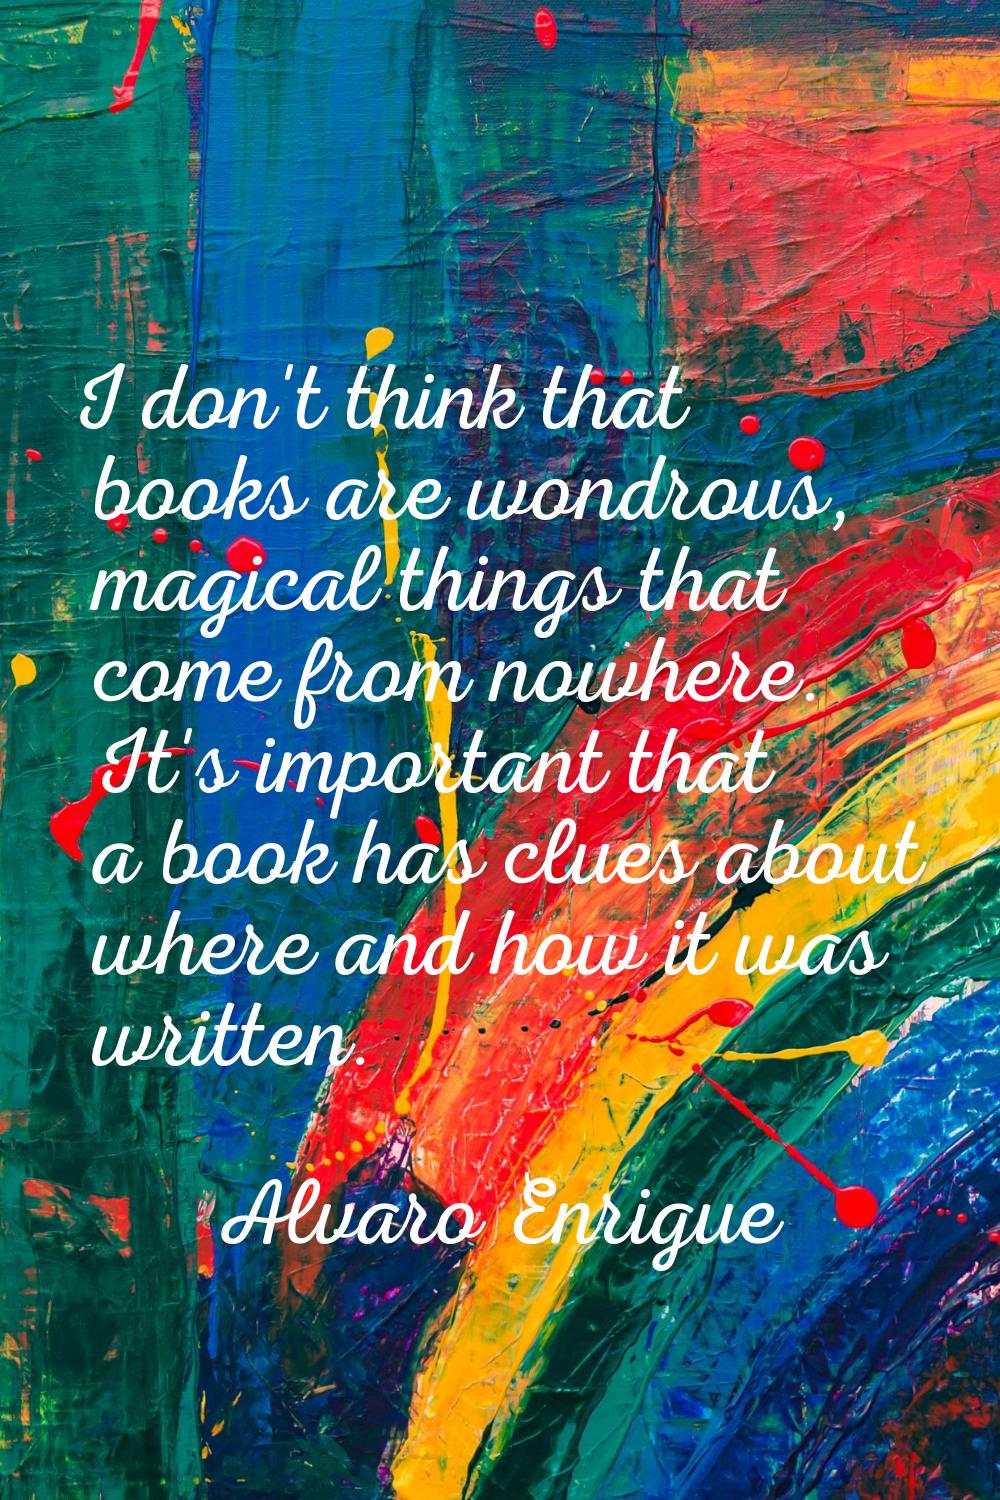 I don't think that books are wondrous, magical things that come from nowhere. It's important that a